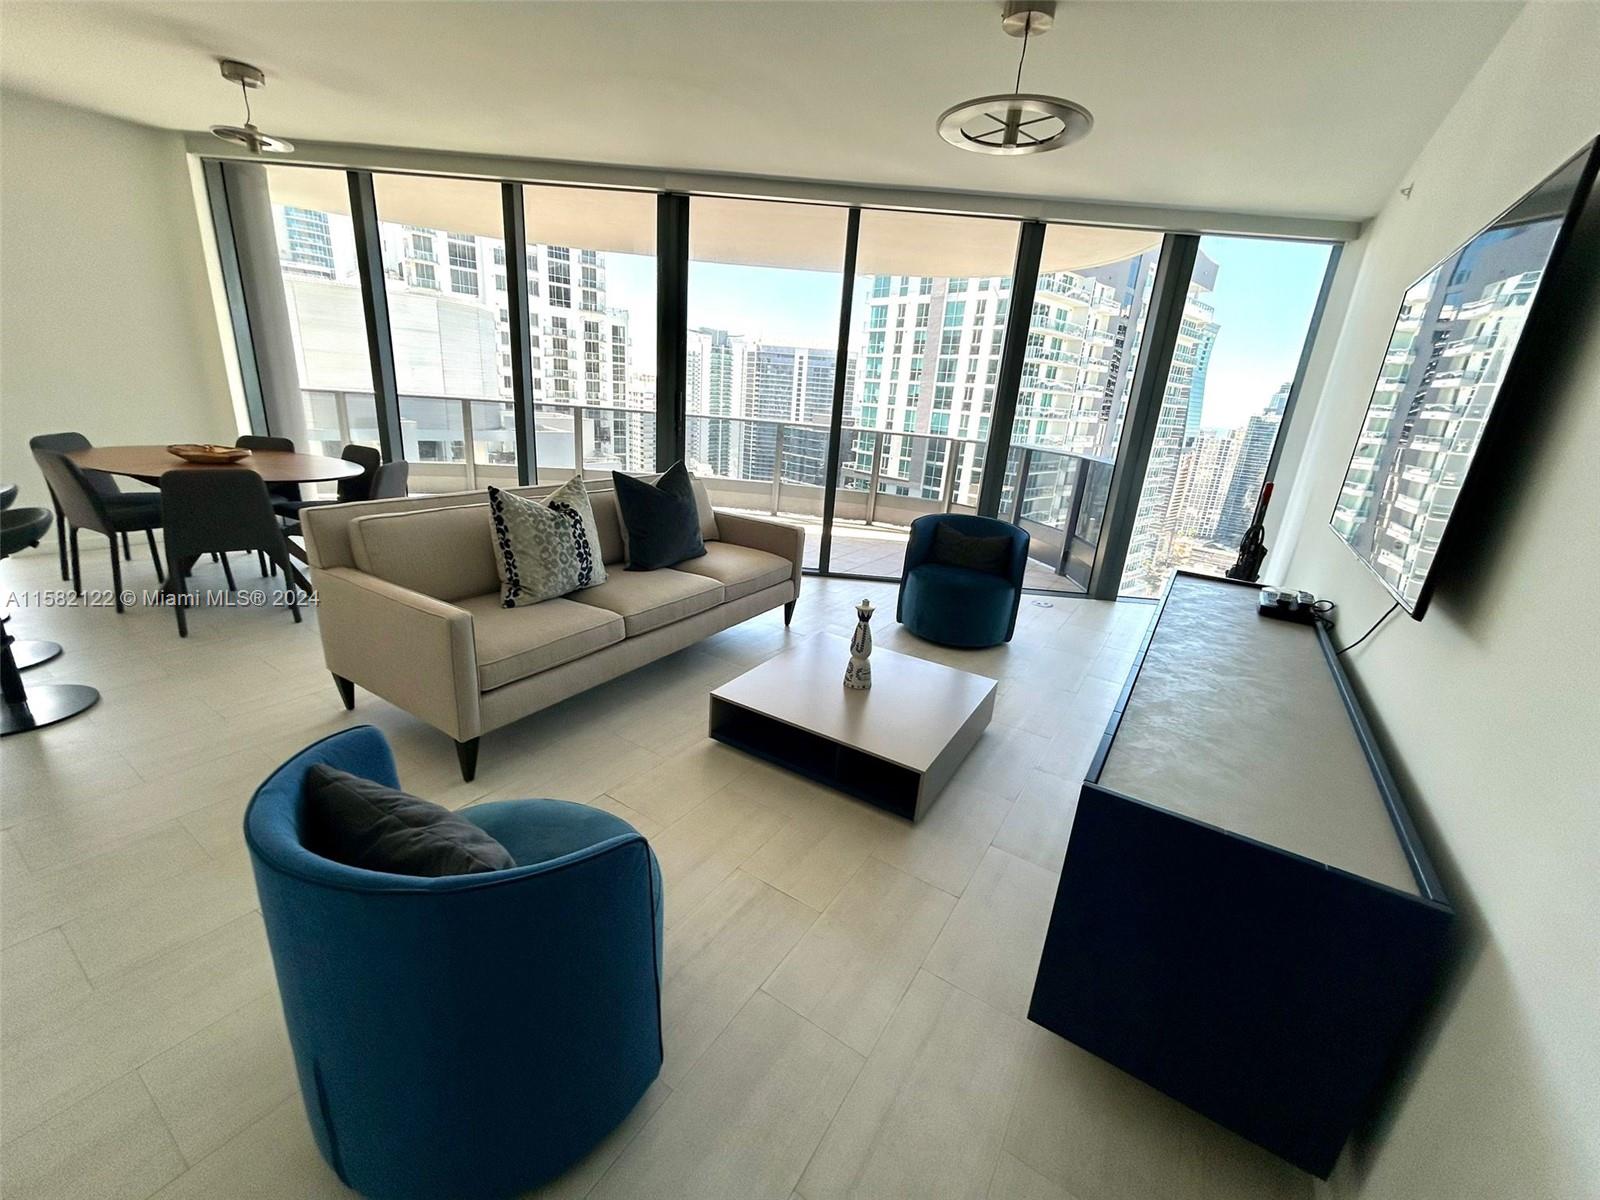 Fantastic unit corner unit in the most highly sought after building in Miami.